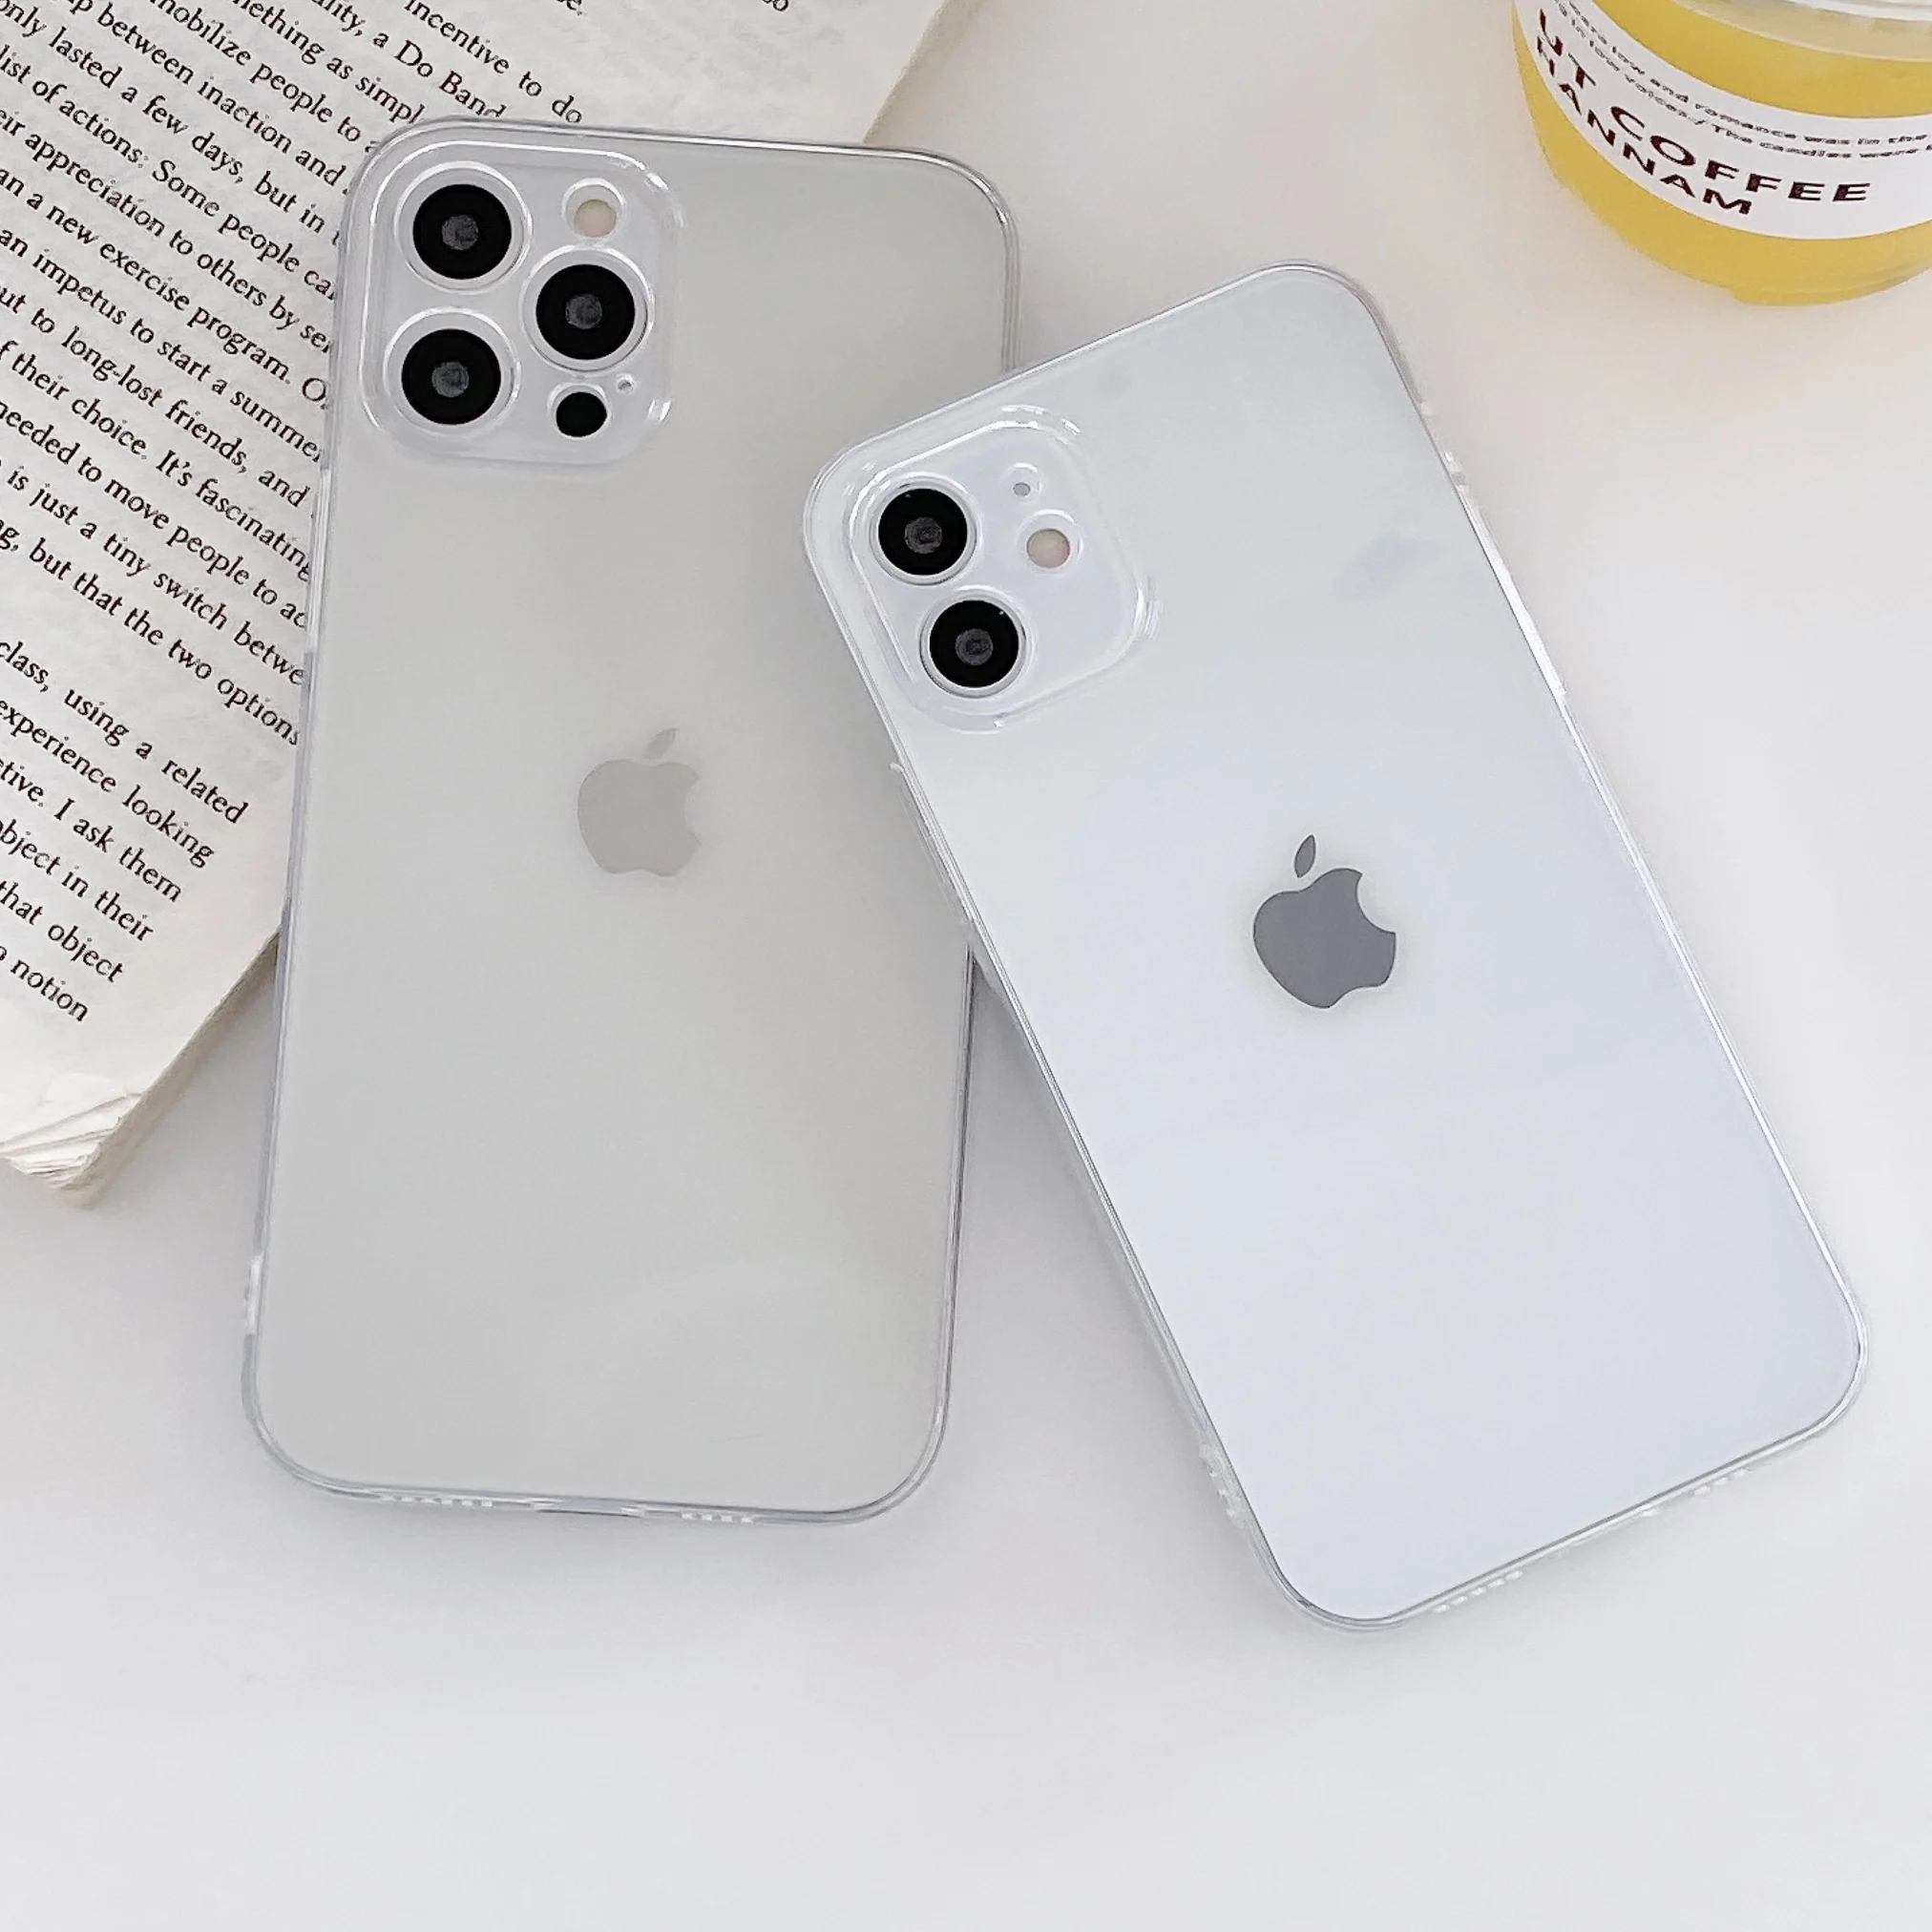 

Mobile Phone Case For iPhone 11/12/13 Pro Four-corner Anti-dropTransparent Protective Cover For iPhone6/7/8 Plus XS Max